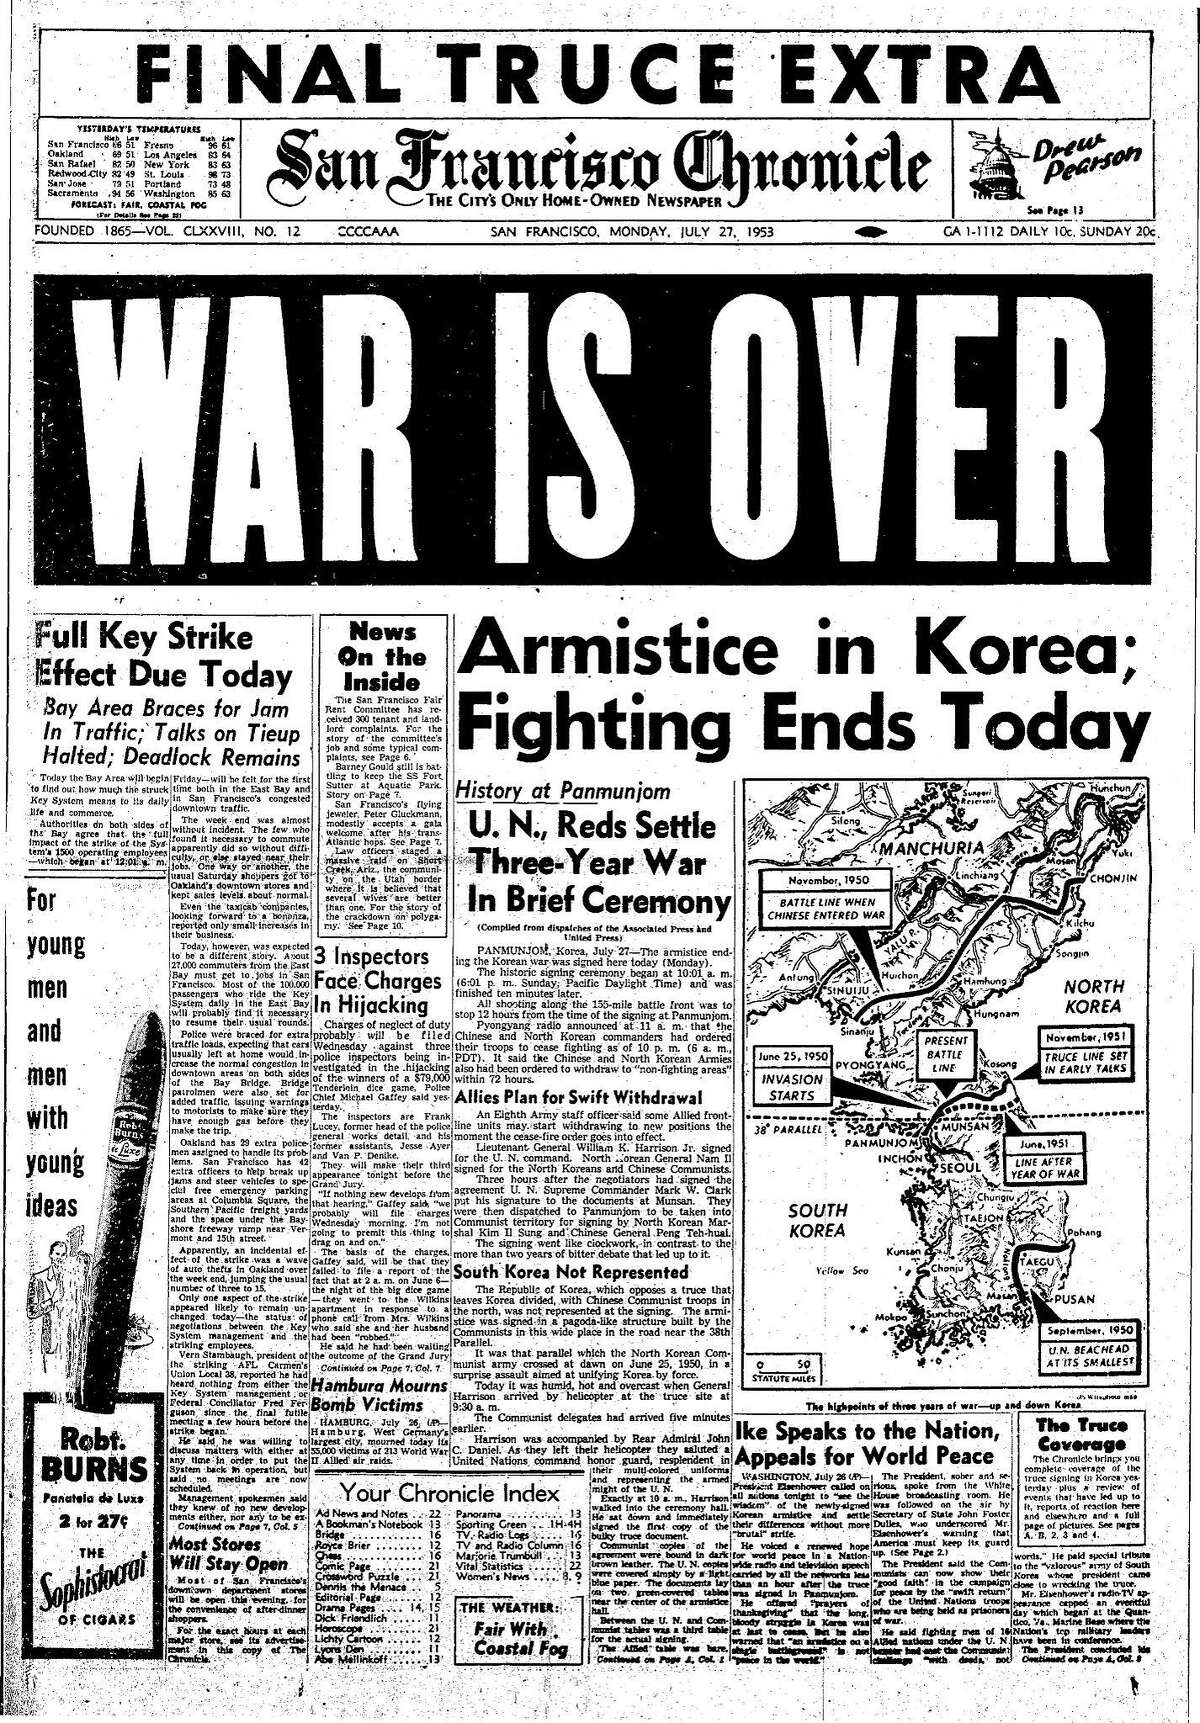 Historic Chronicle Front Page July 27, 1953 Korean War is over, Chron365, Chroncover